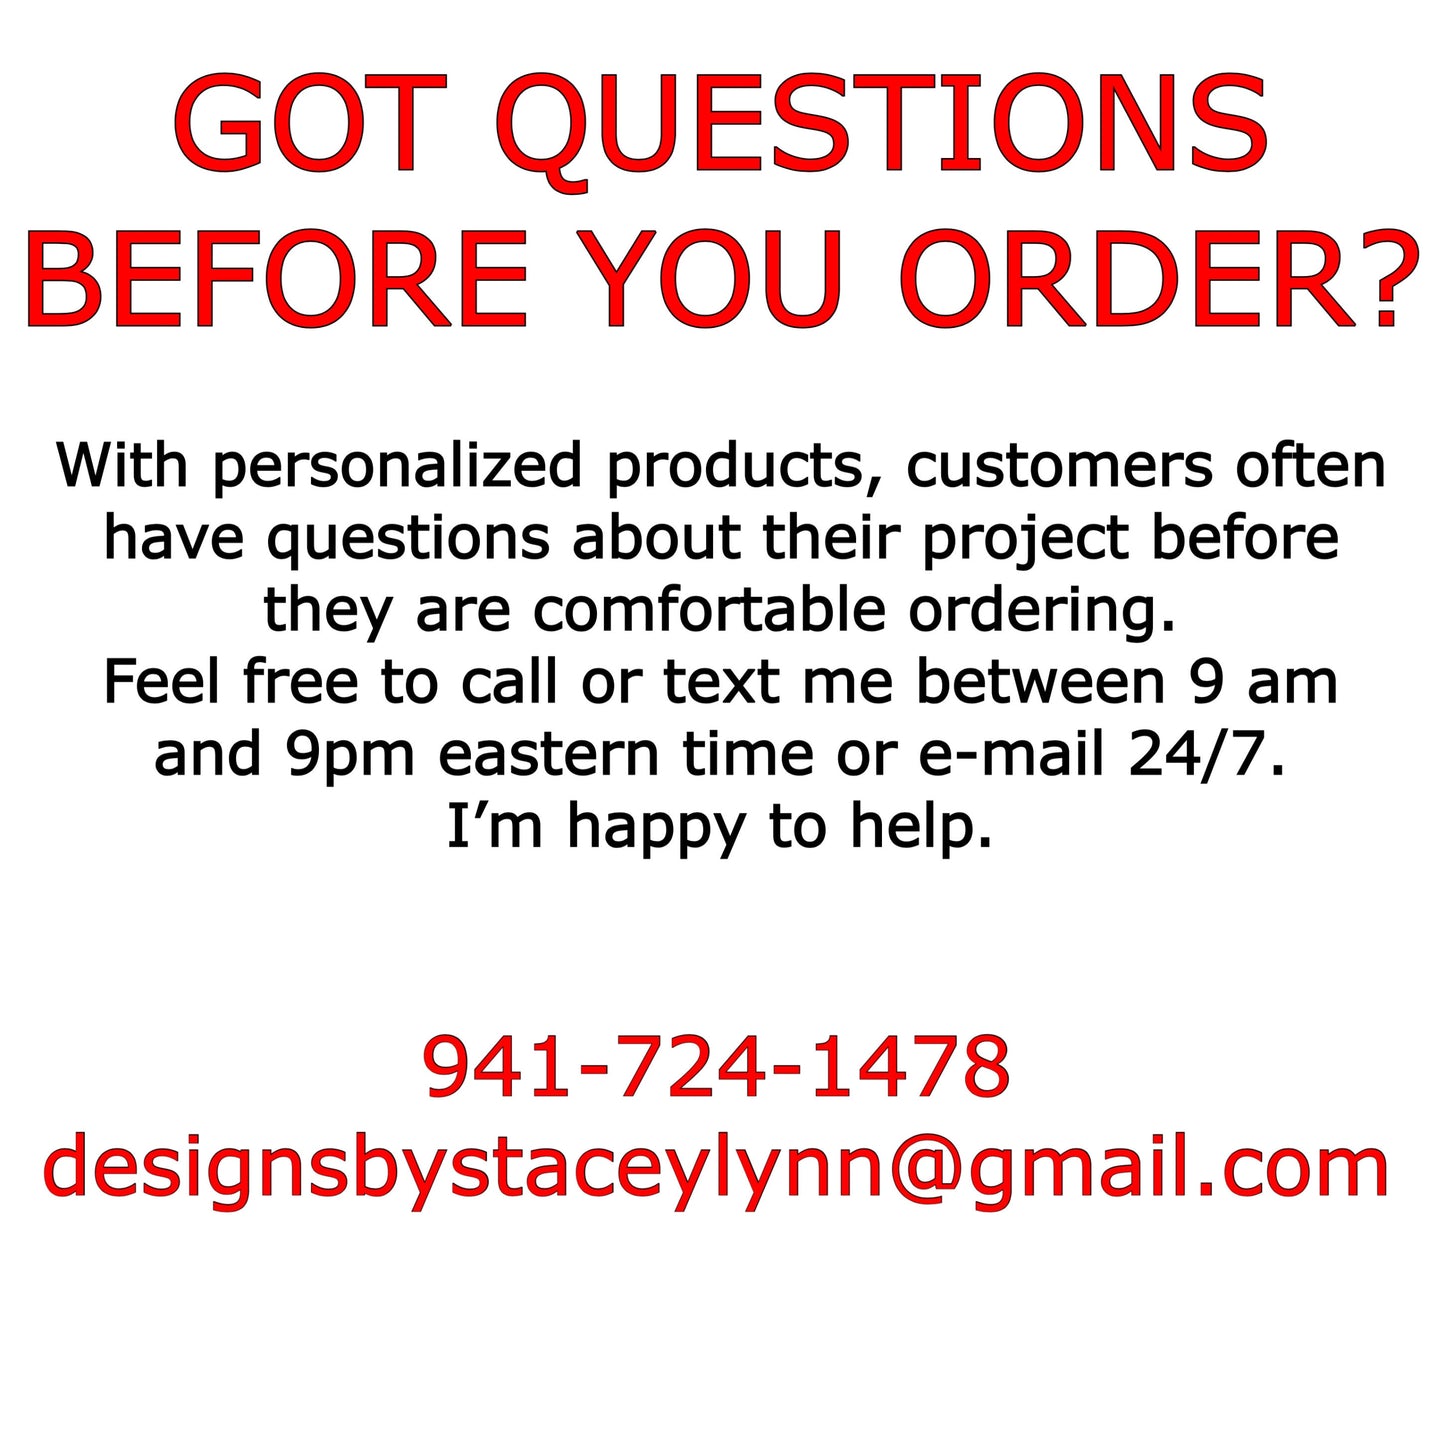 You are one of a kind - UV/ Waterproof Vinyl Sticker/ Decal- Choice of Size, Single or Bulk quantities